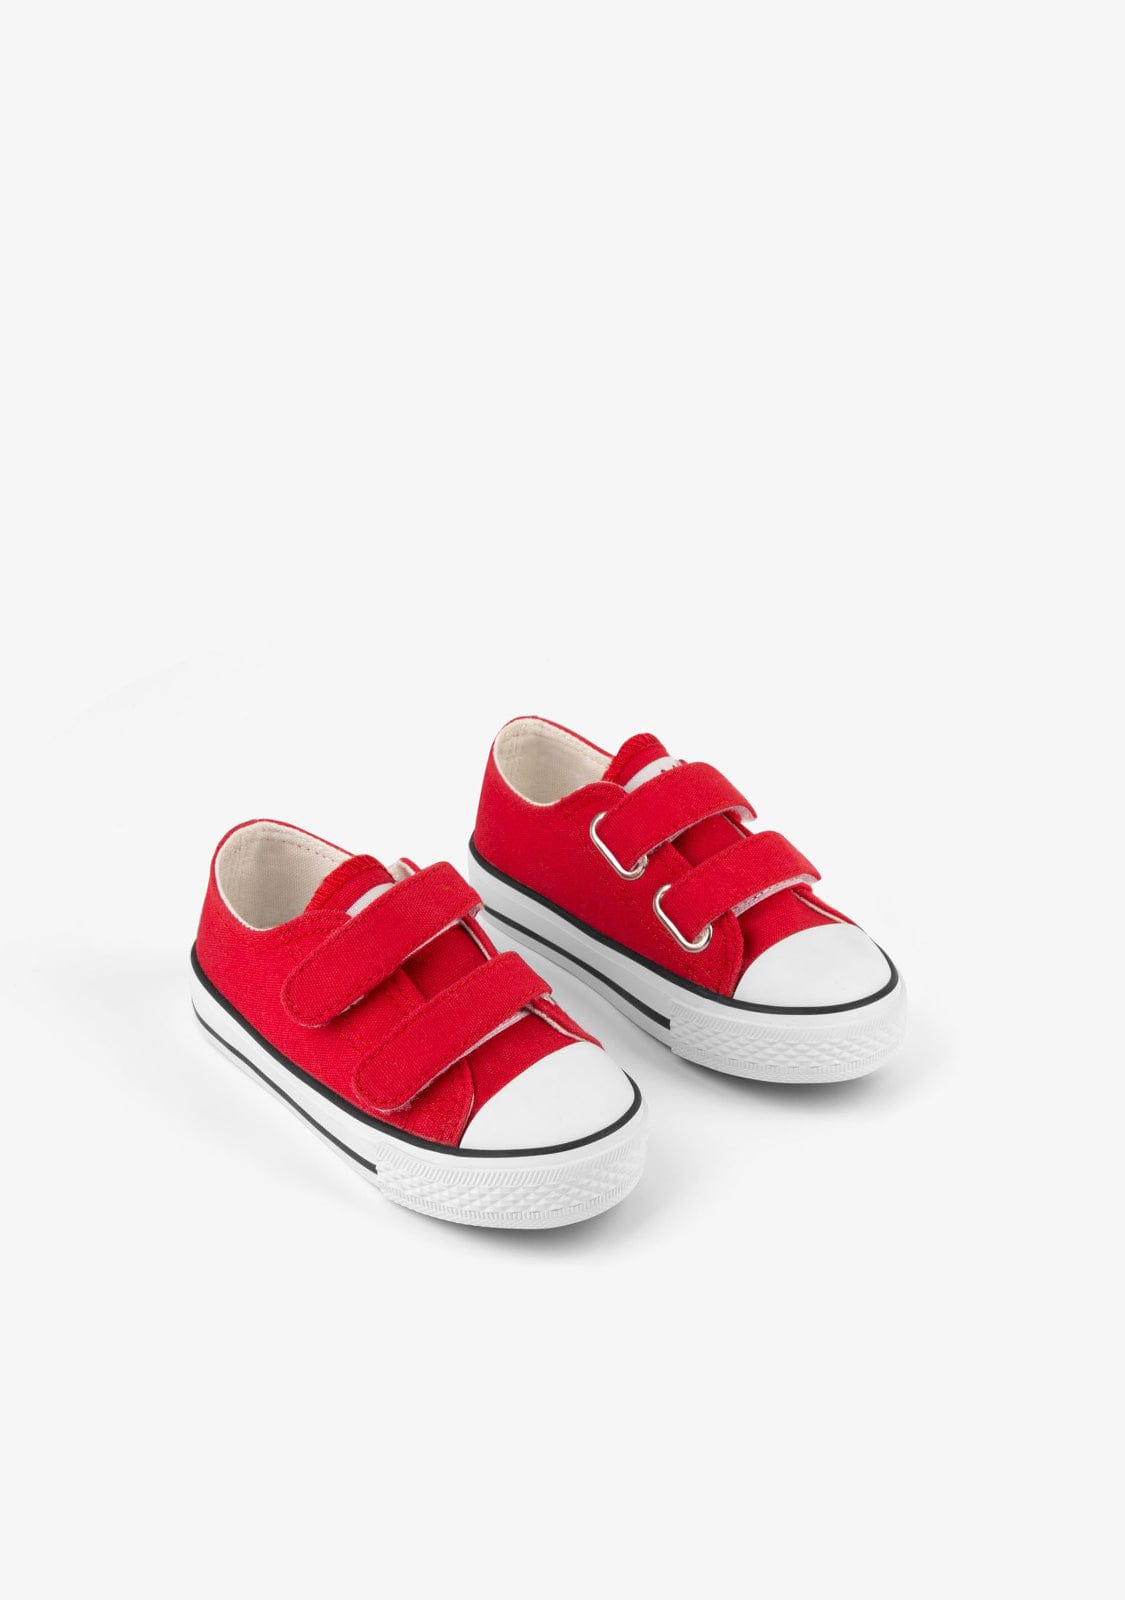 OSITO Shoes Baby's Red Basic Sneakers Canvas